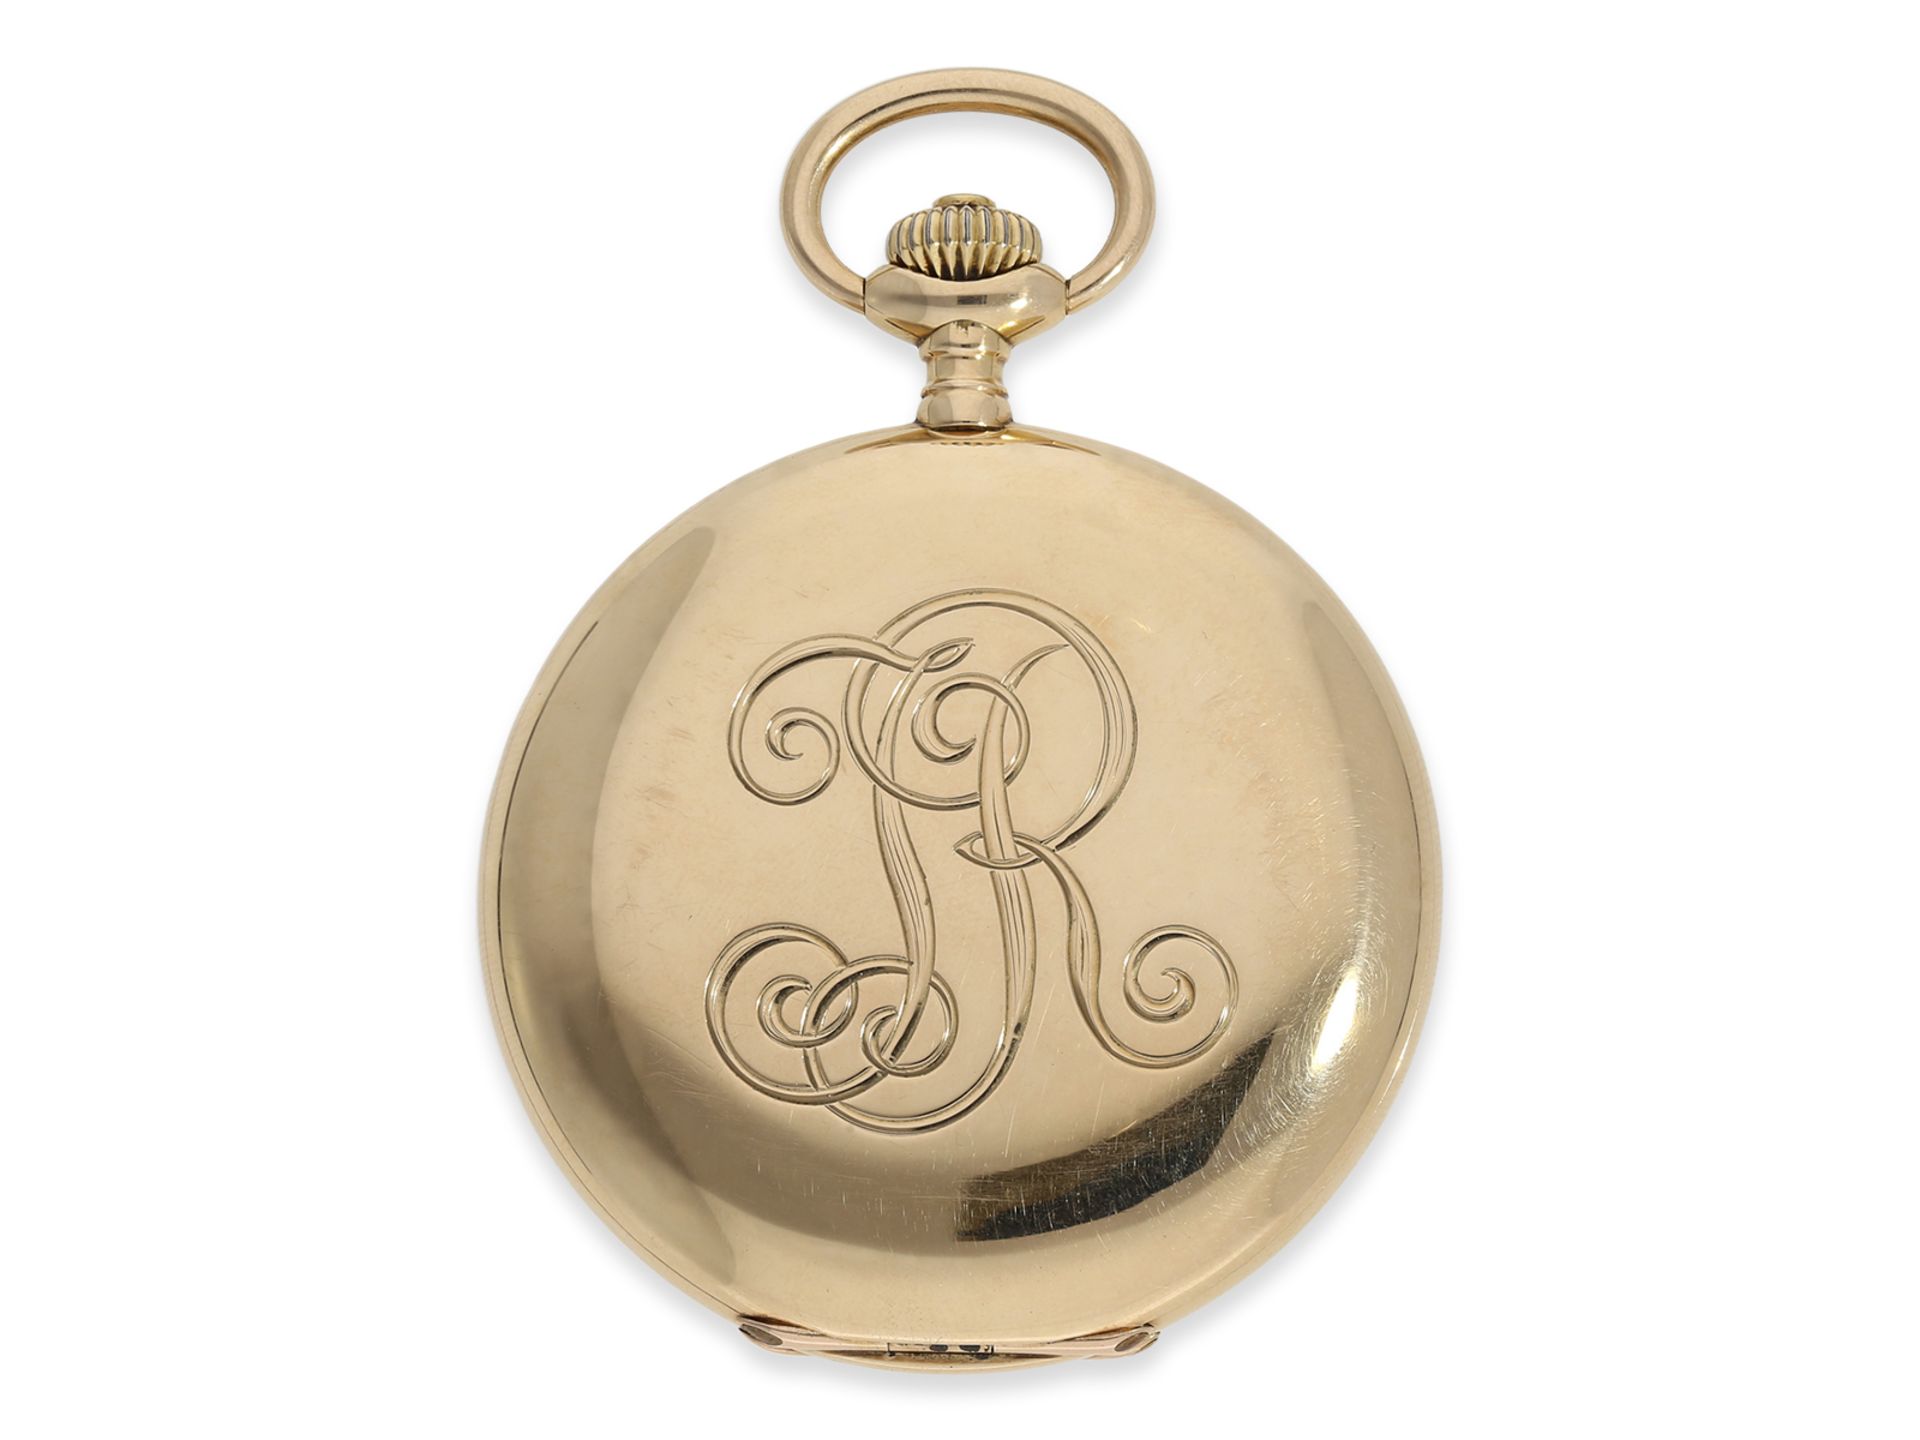 Pocket Watch: very fine precision pocket watch by Ulysse Nardin with original papers from 1913 - Image 6 of 8